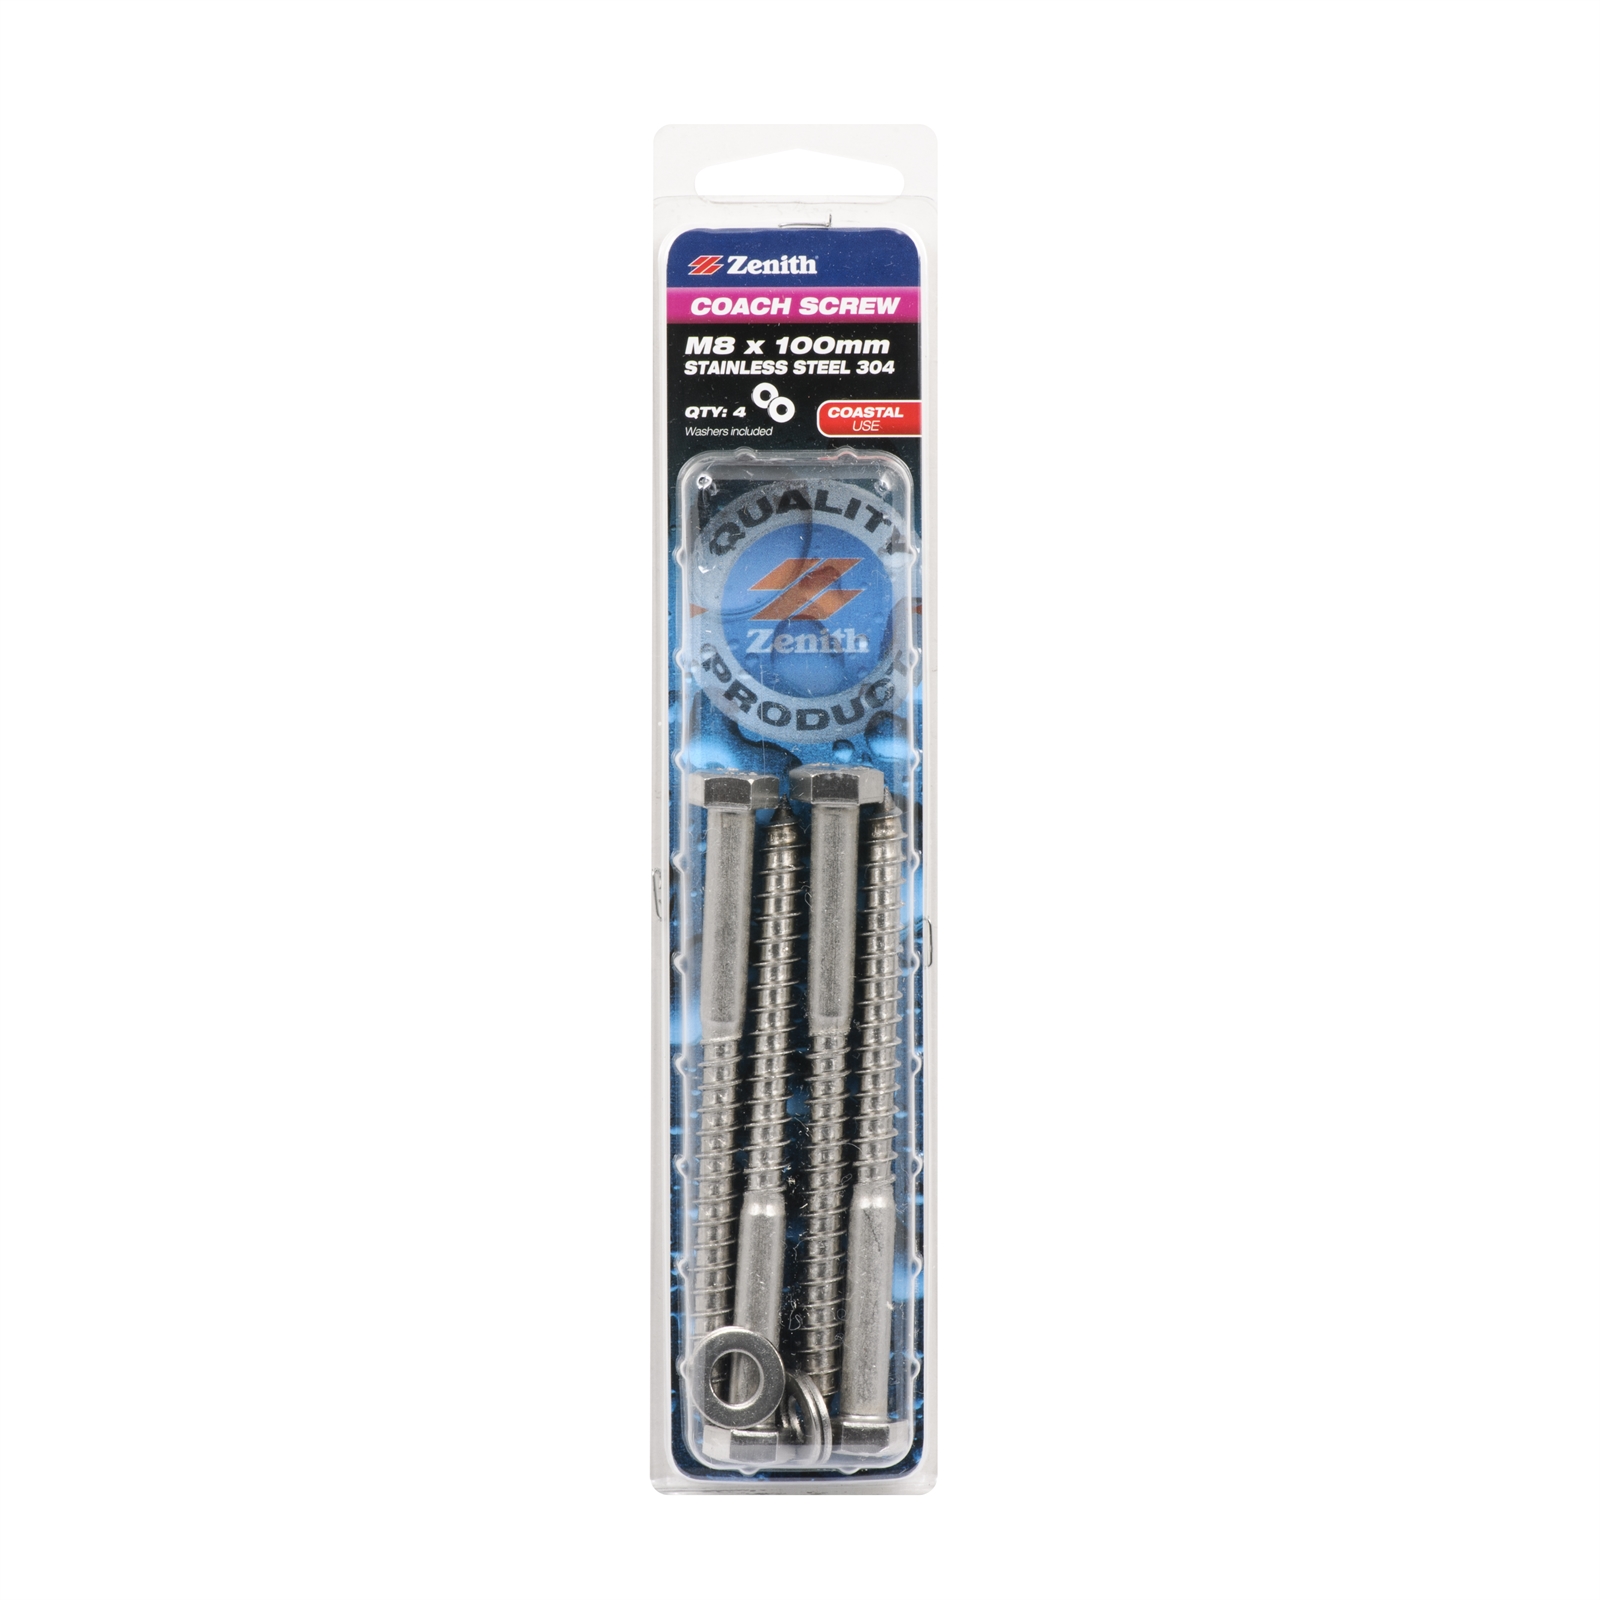 Zenith M8 x 100mm Stainless Steel Coach Screw - 4 Pack